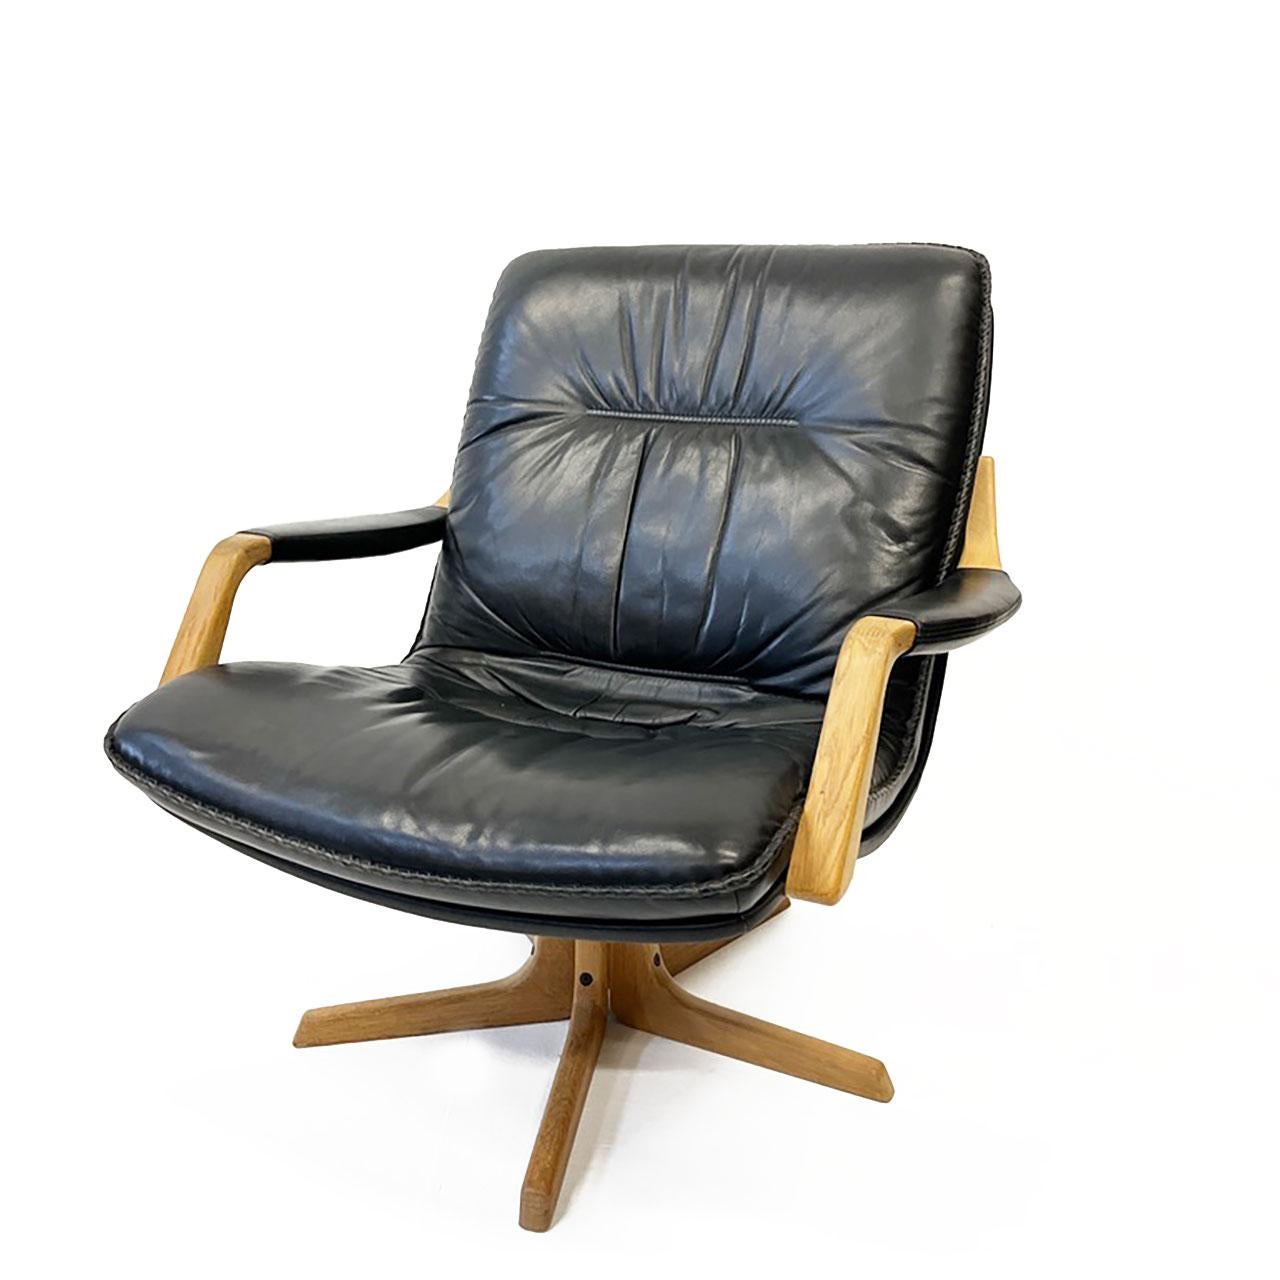 20th Century Danish Black Leather Swivel Chair from Berg Furniture, Denmark 1970s For Sale